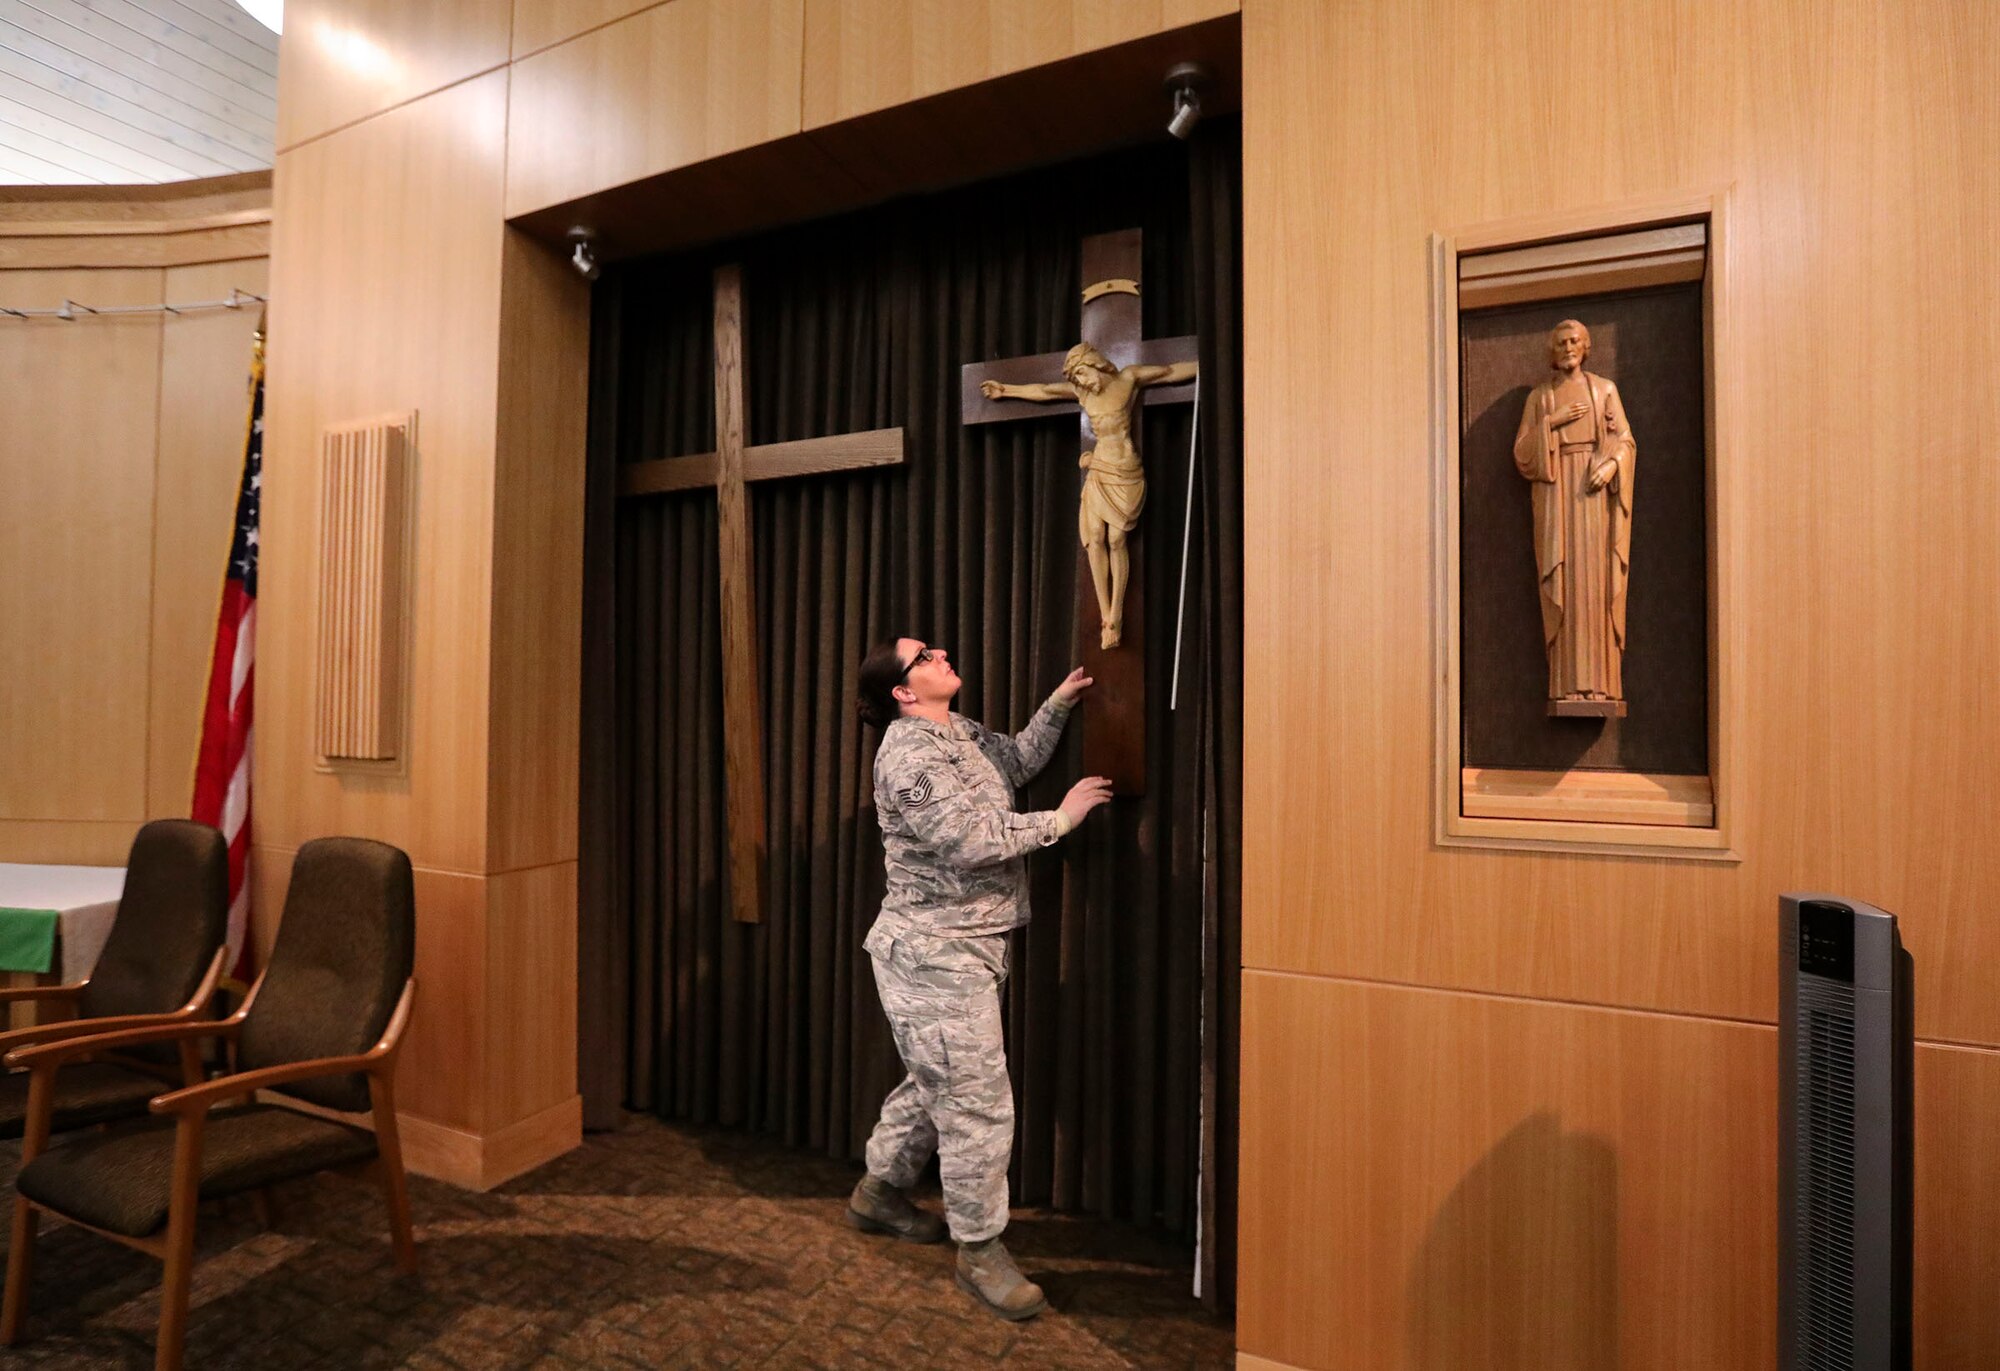 Tech. Sgt. Crystal McClellan, non-commissioned officer in charge of religious affairs, shows how a plain cross for Protestant services or the crucifix for Catholic services can be displayed in the sanctuary.